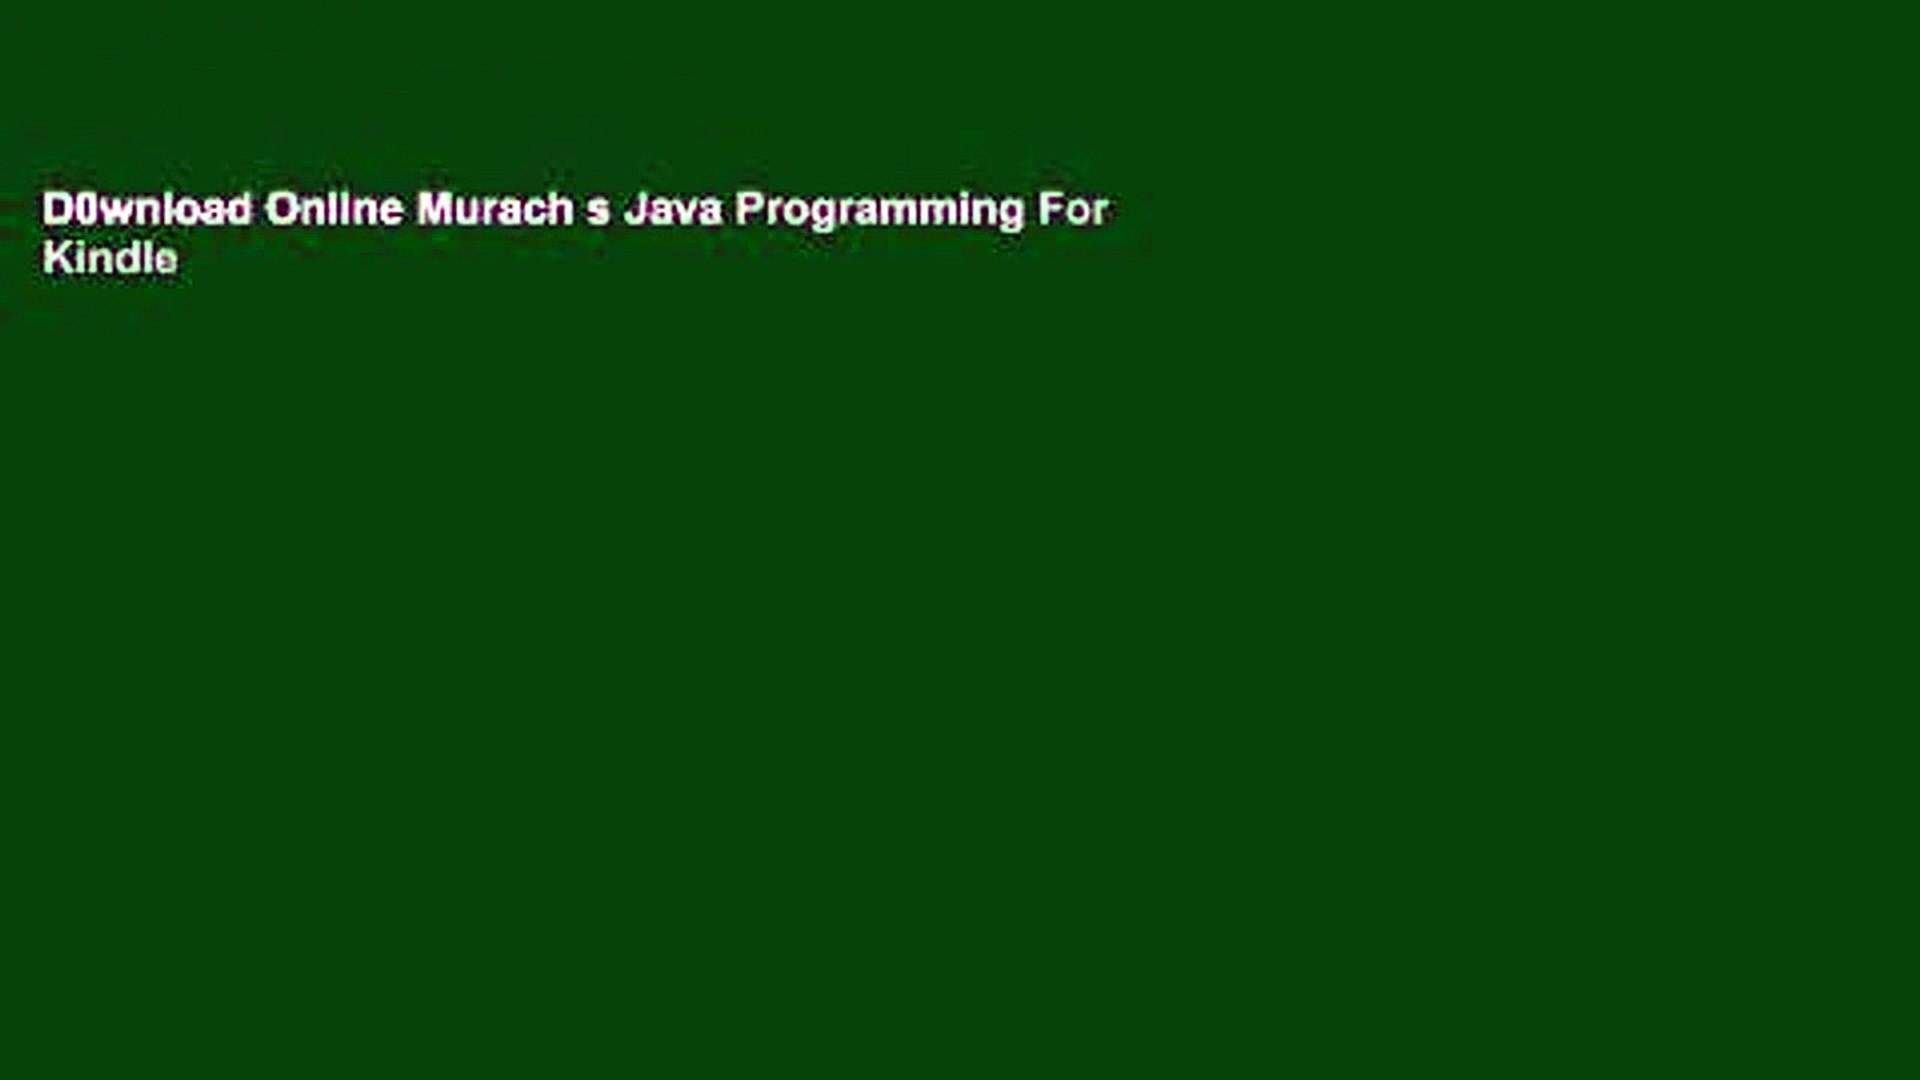 D0wnload Online Murach s Java Programming For Kindle